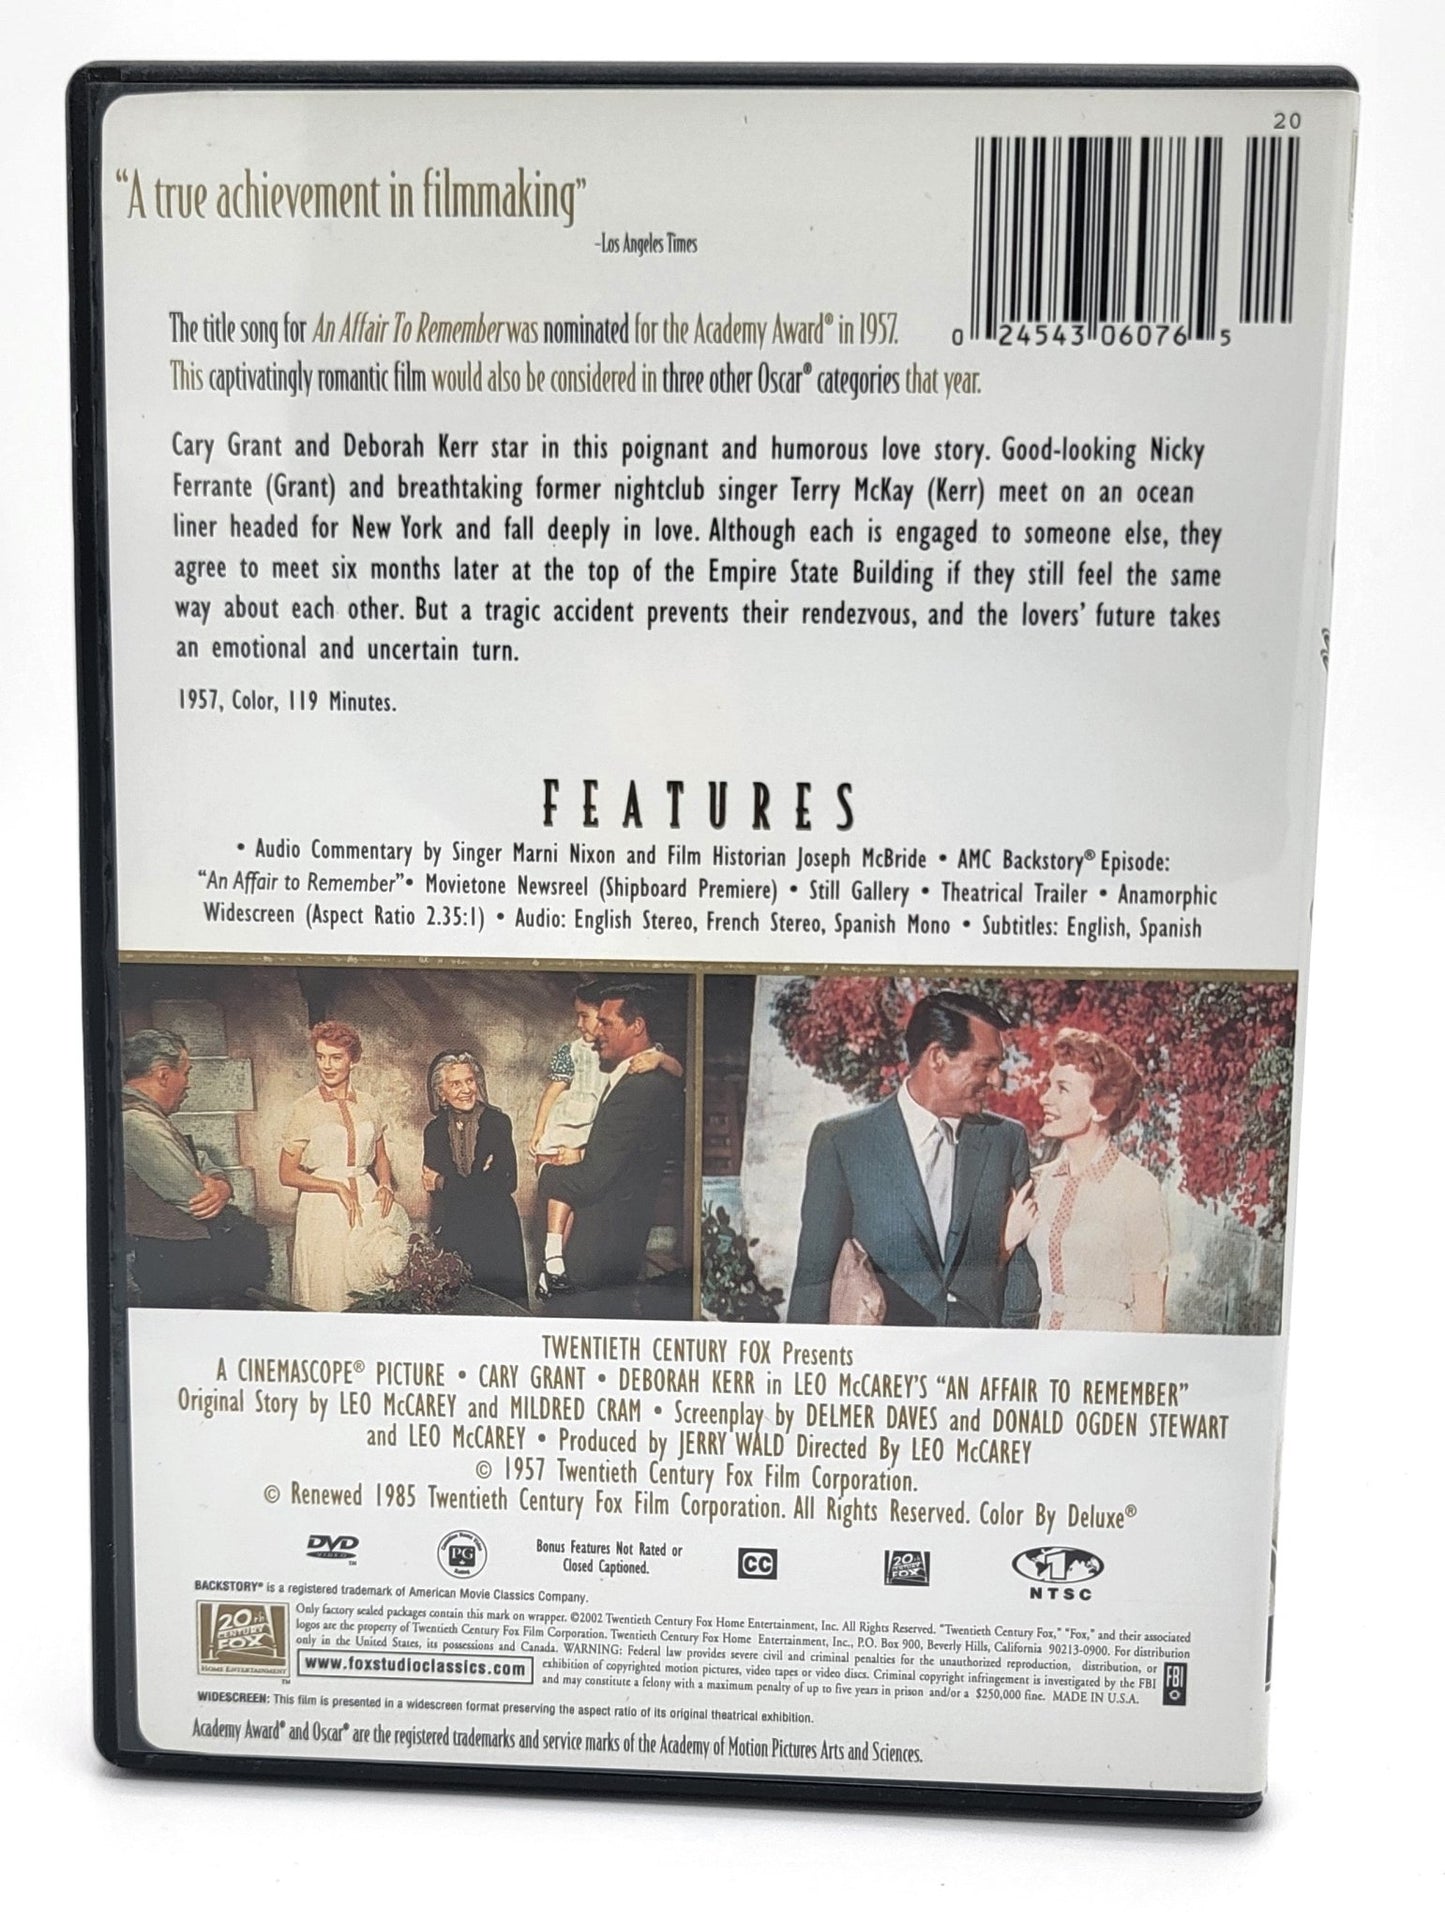 20th Century Fox Home Entertainment - An Affair to Remember | DVD | Studio Classics | Widescreen - Nominated for 4 Academy Awards 1957 - DVD - Steady Bunny Shop